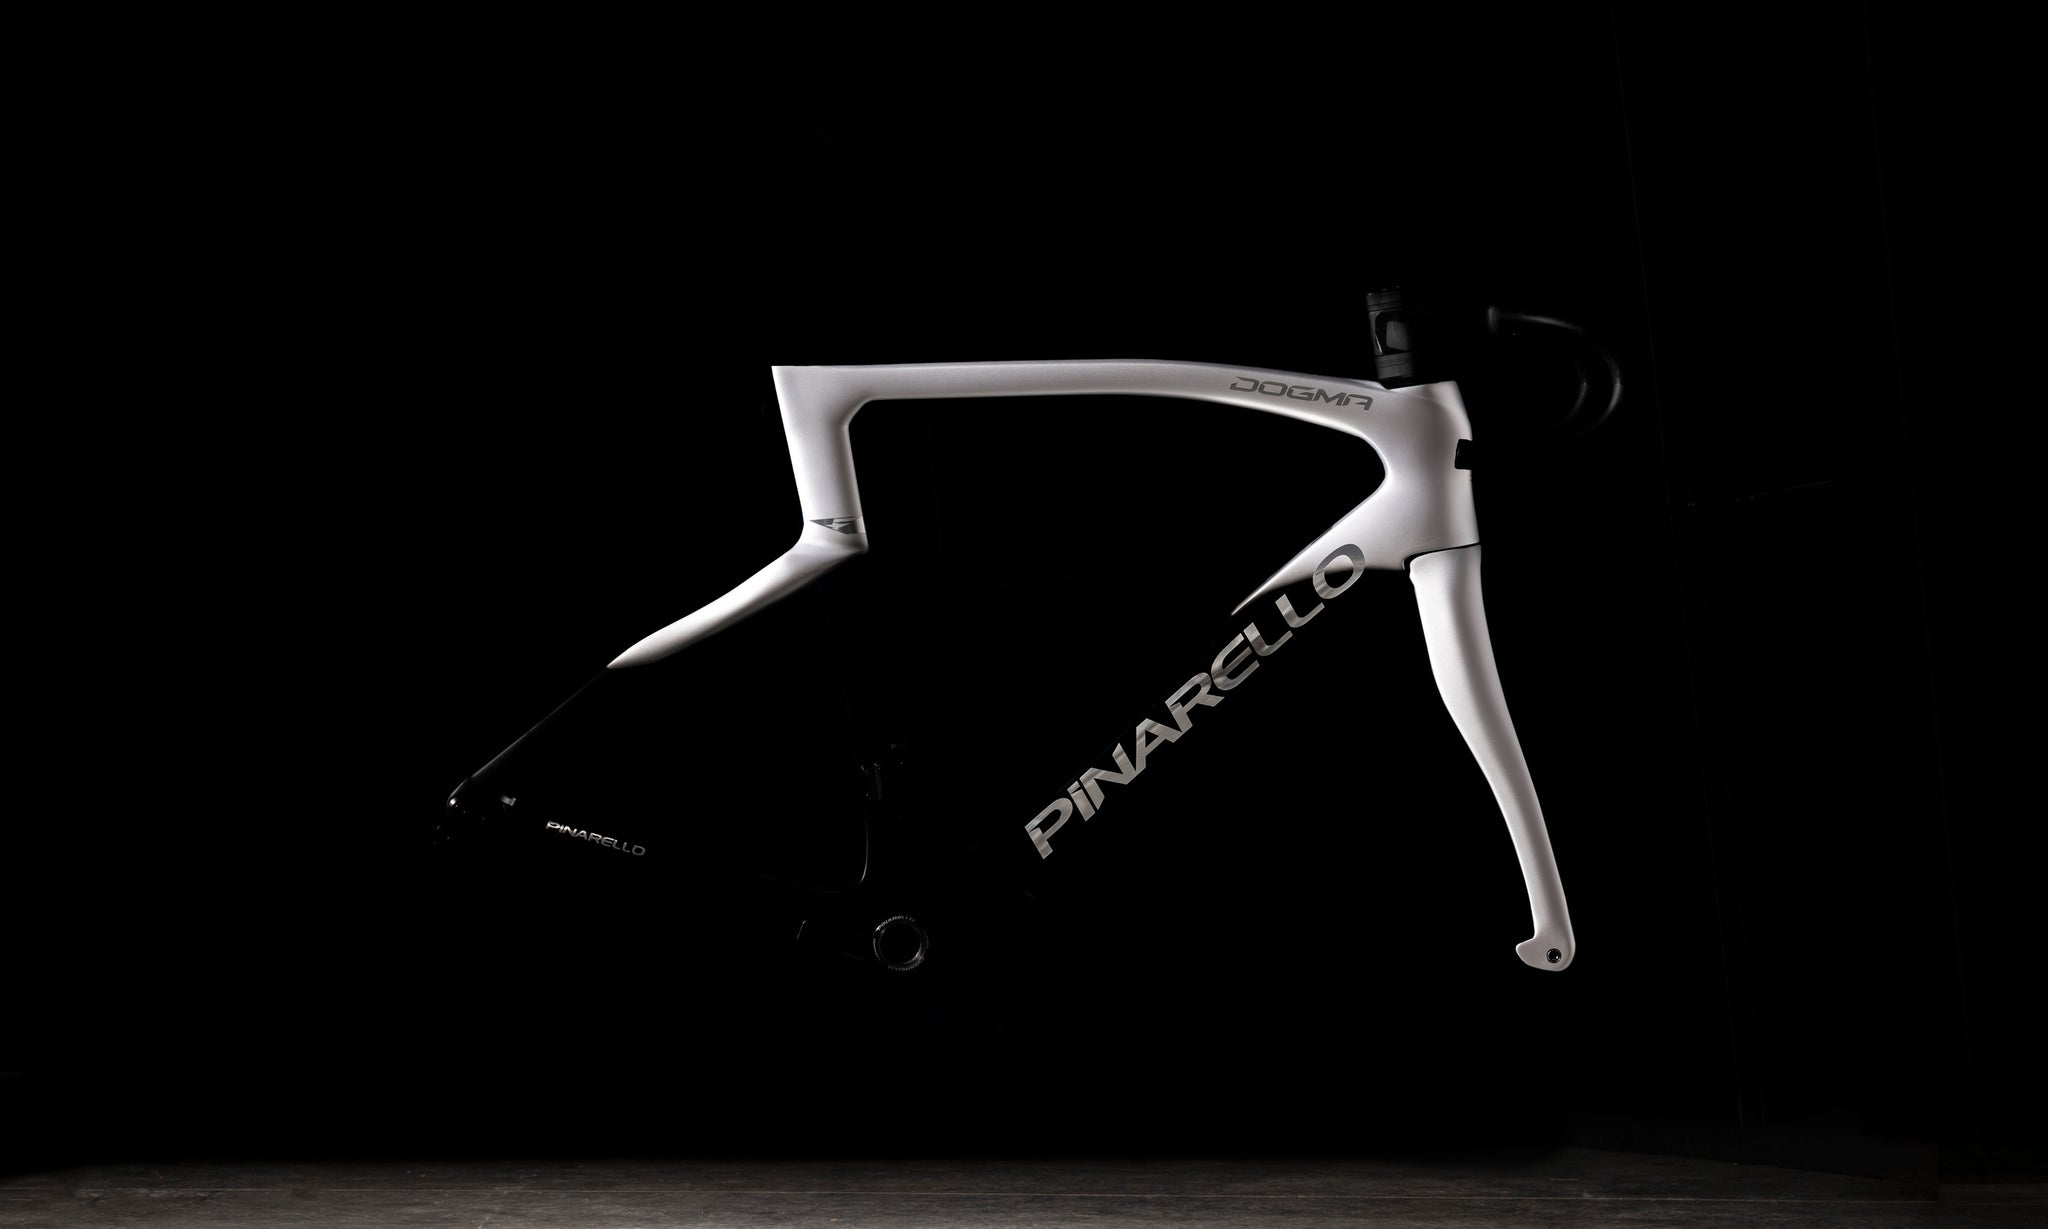 For Some Reason the Pinarello Dogma F Lives in My Mind Rent Free